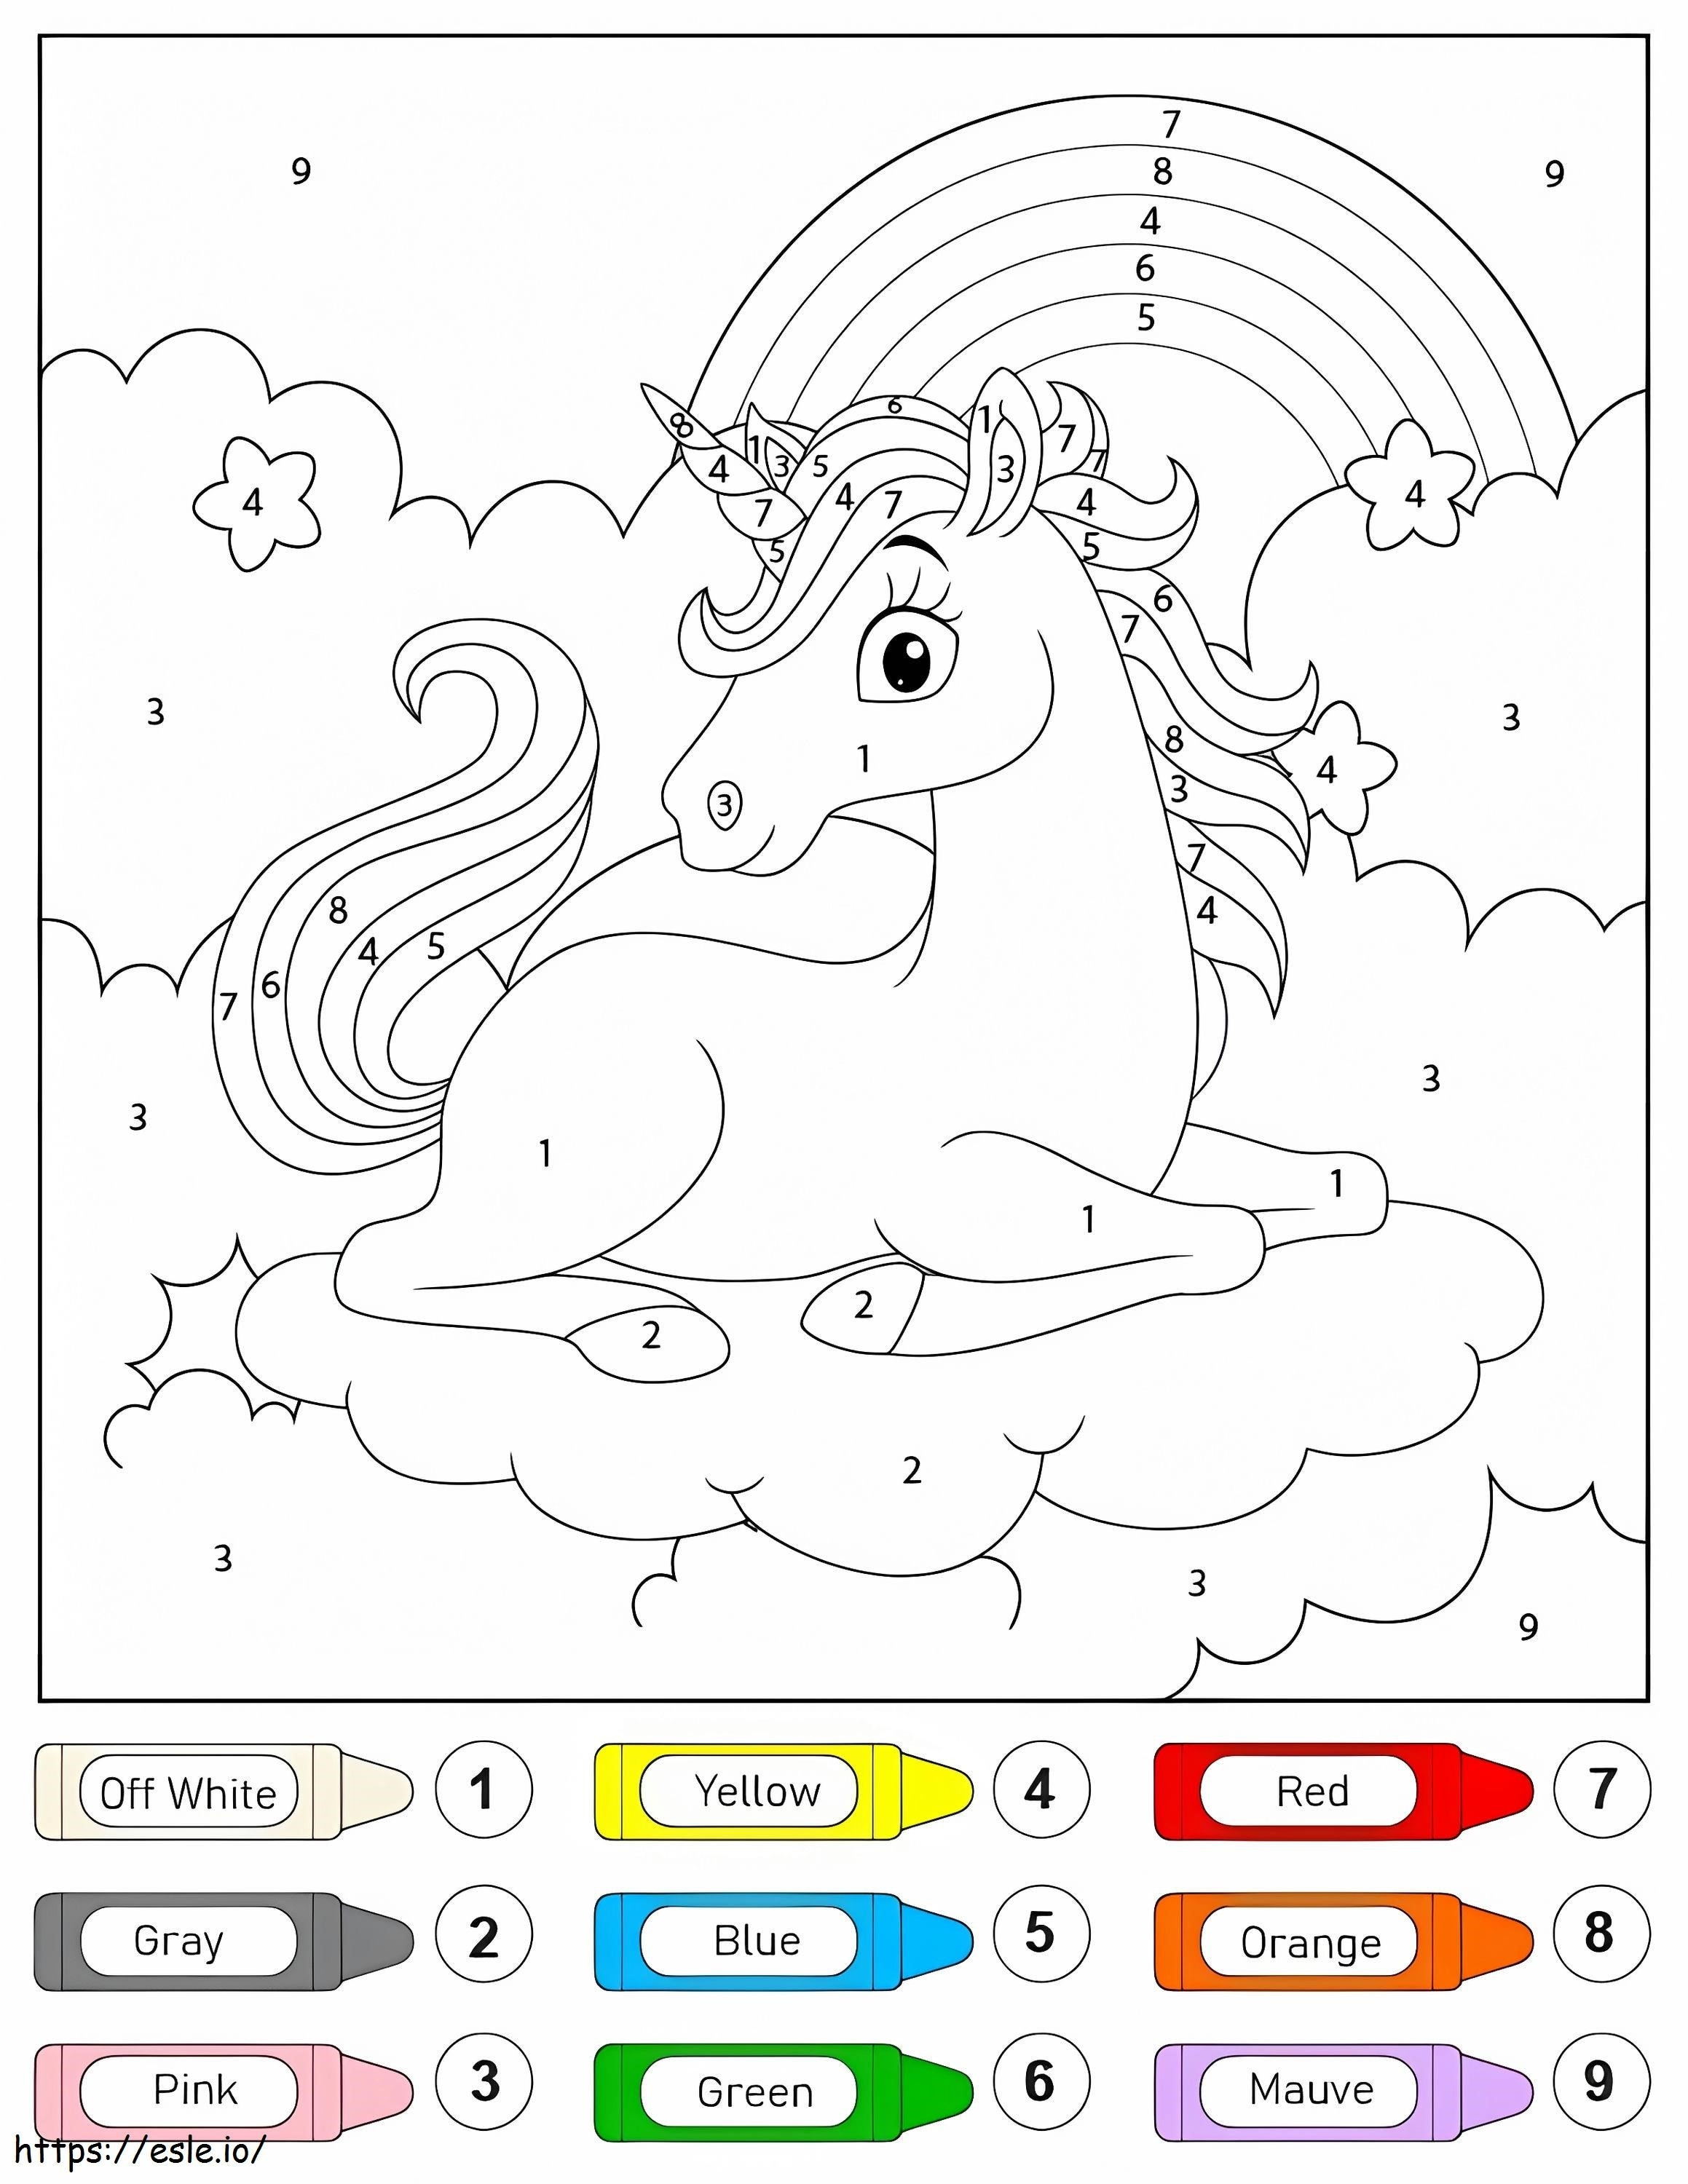 Unicorn Sitting On Clouds Color By Number coloring page